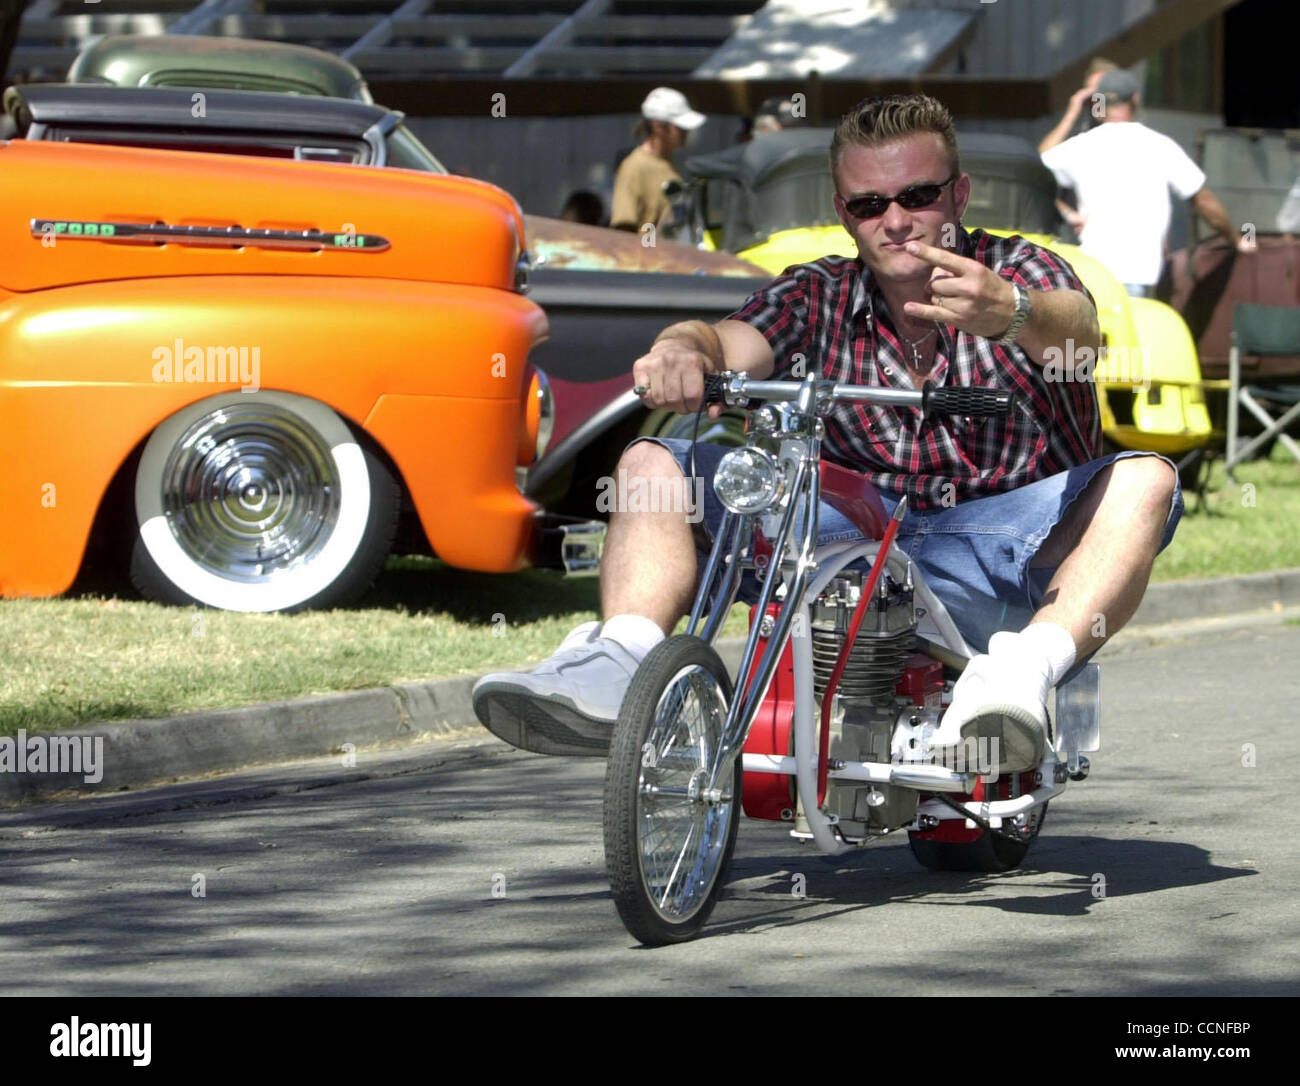 Doug Fraschiero (cq) of Martinez, Calif. rides his mini chopper during the  Billetproof Nor Cal 2004 car show at the Contra Costa County Fairgrounds in  Antioch, Calif. on Saturday, September 25, 2004.